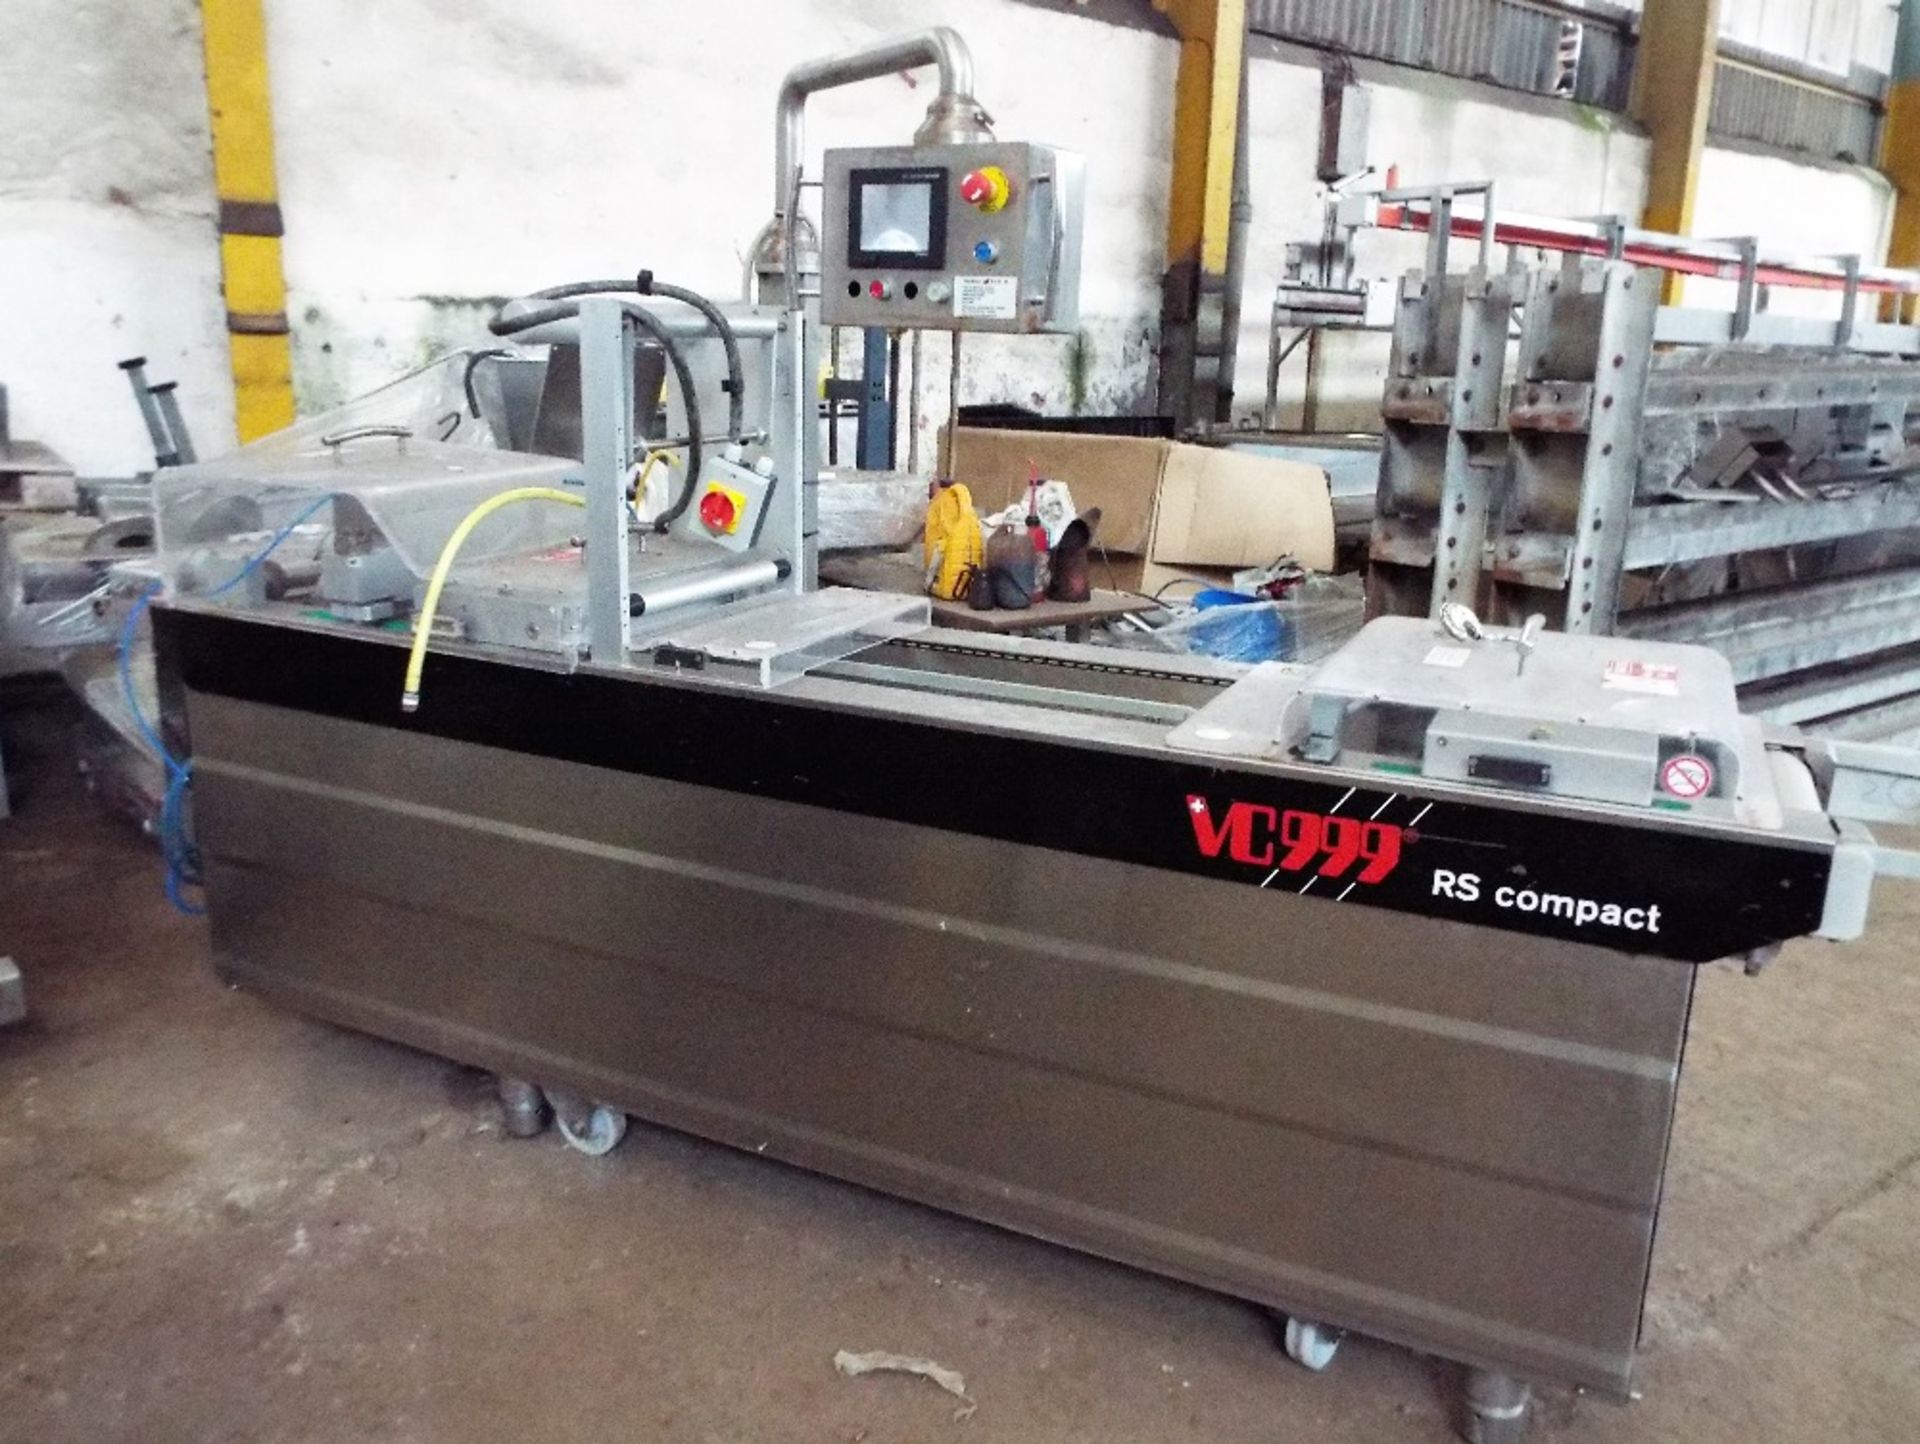 RS COMPACT VC999 Flow Wrapping Machine